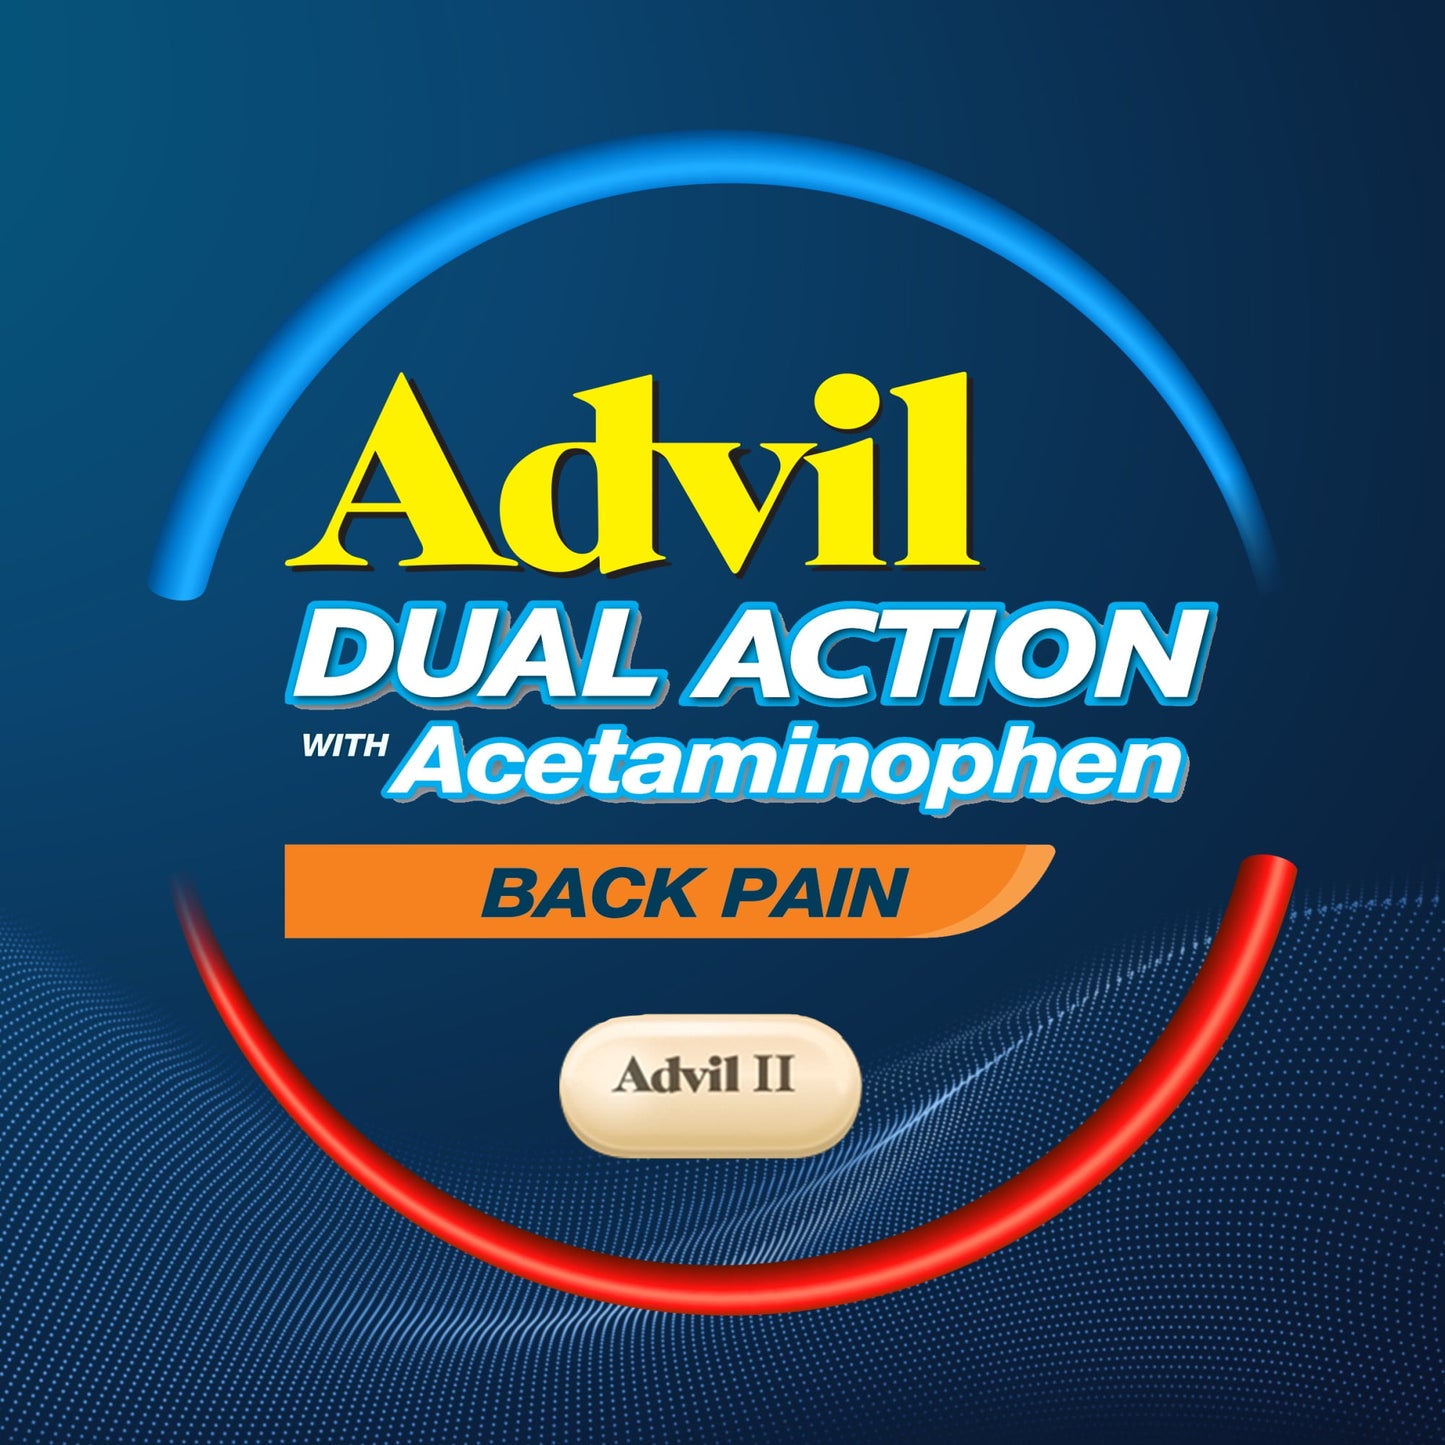 Advil Dual Action Back Pain Caplets Delivers 250Mg Ibuprofen and 500Mg Acetaminophen Per Dose for 8 Hours of Back Pain Relief - 72 Count